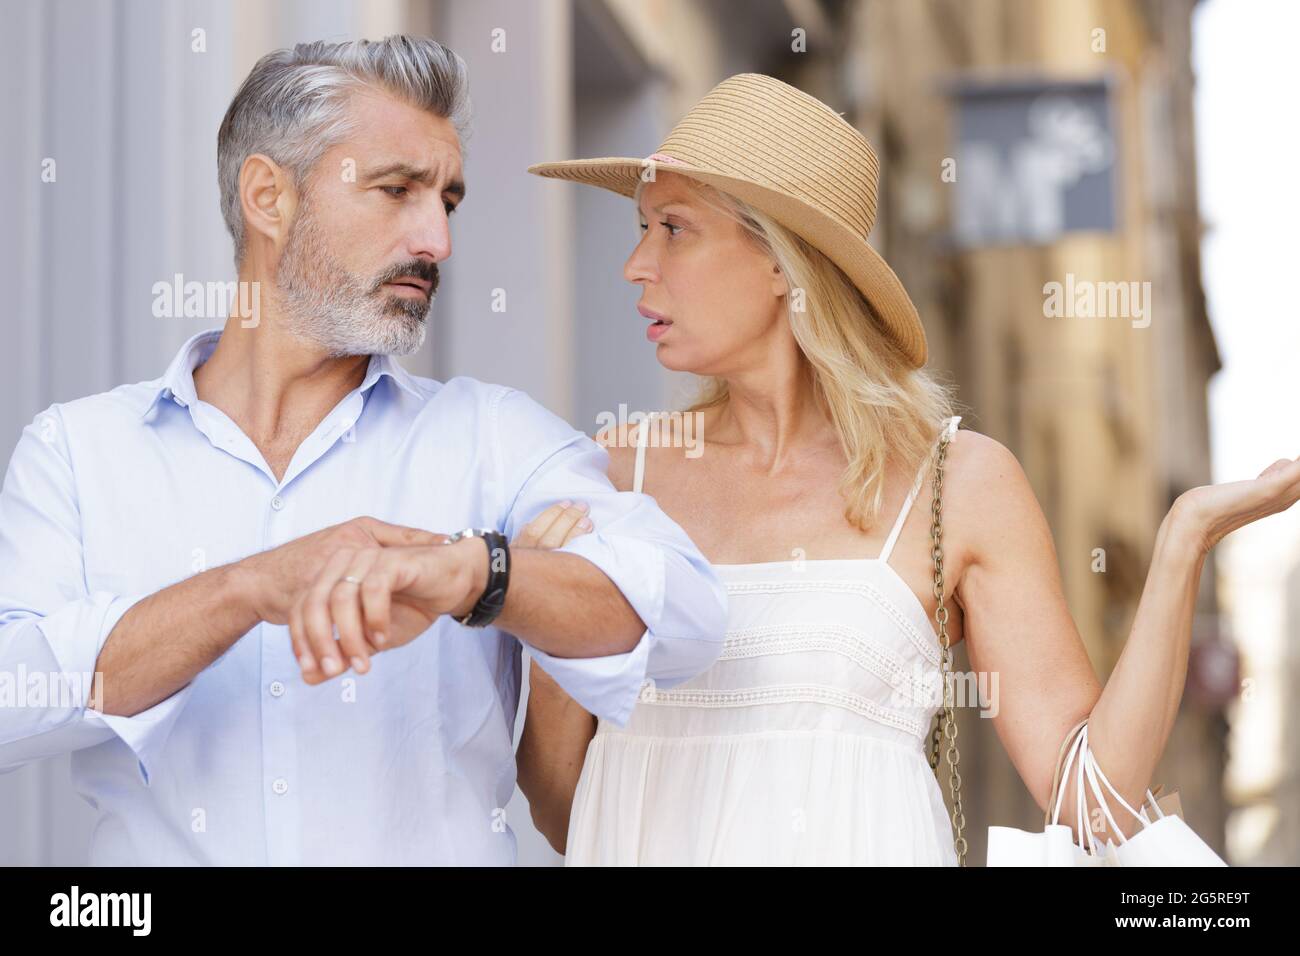 woman and man finger pointing to his watch Stock Photo